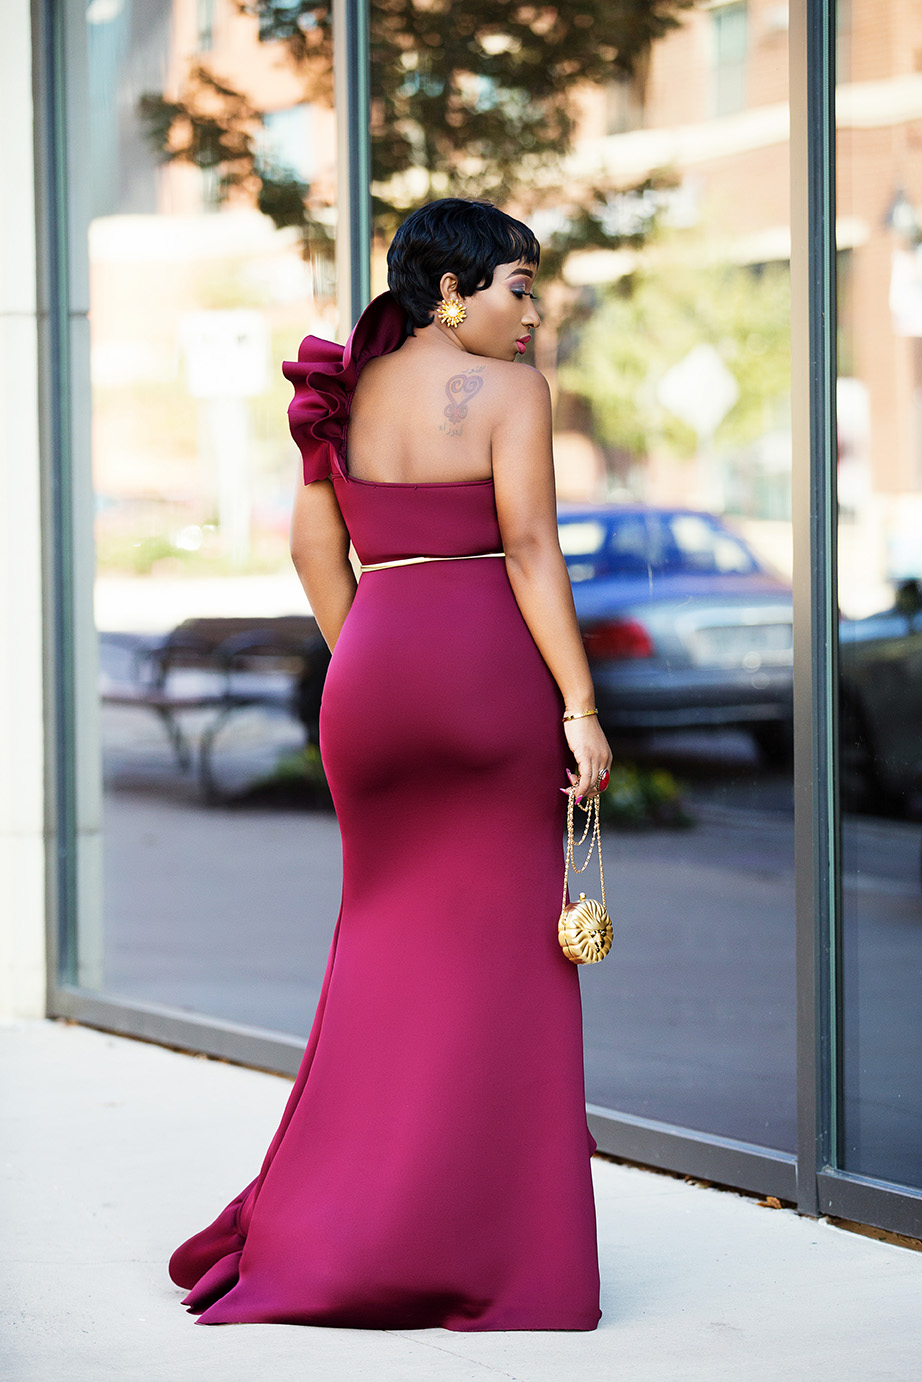 Style Dissection Lookbook 17 Featuring Chic Ama And Her Baby Bump!